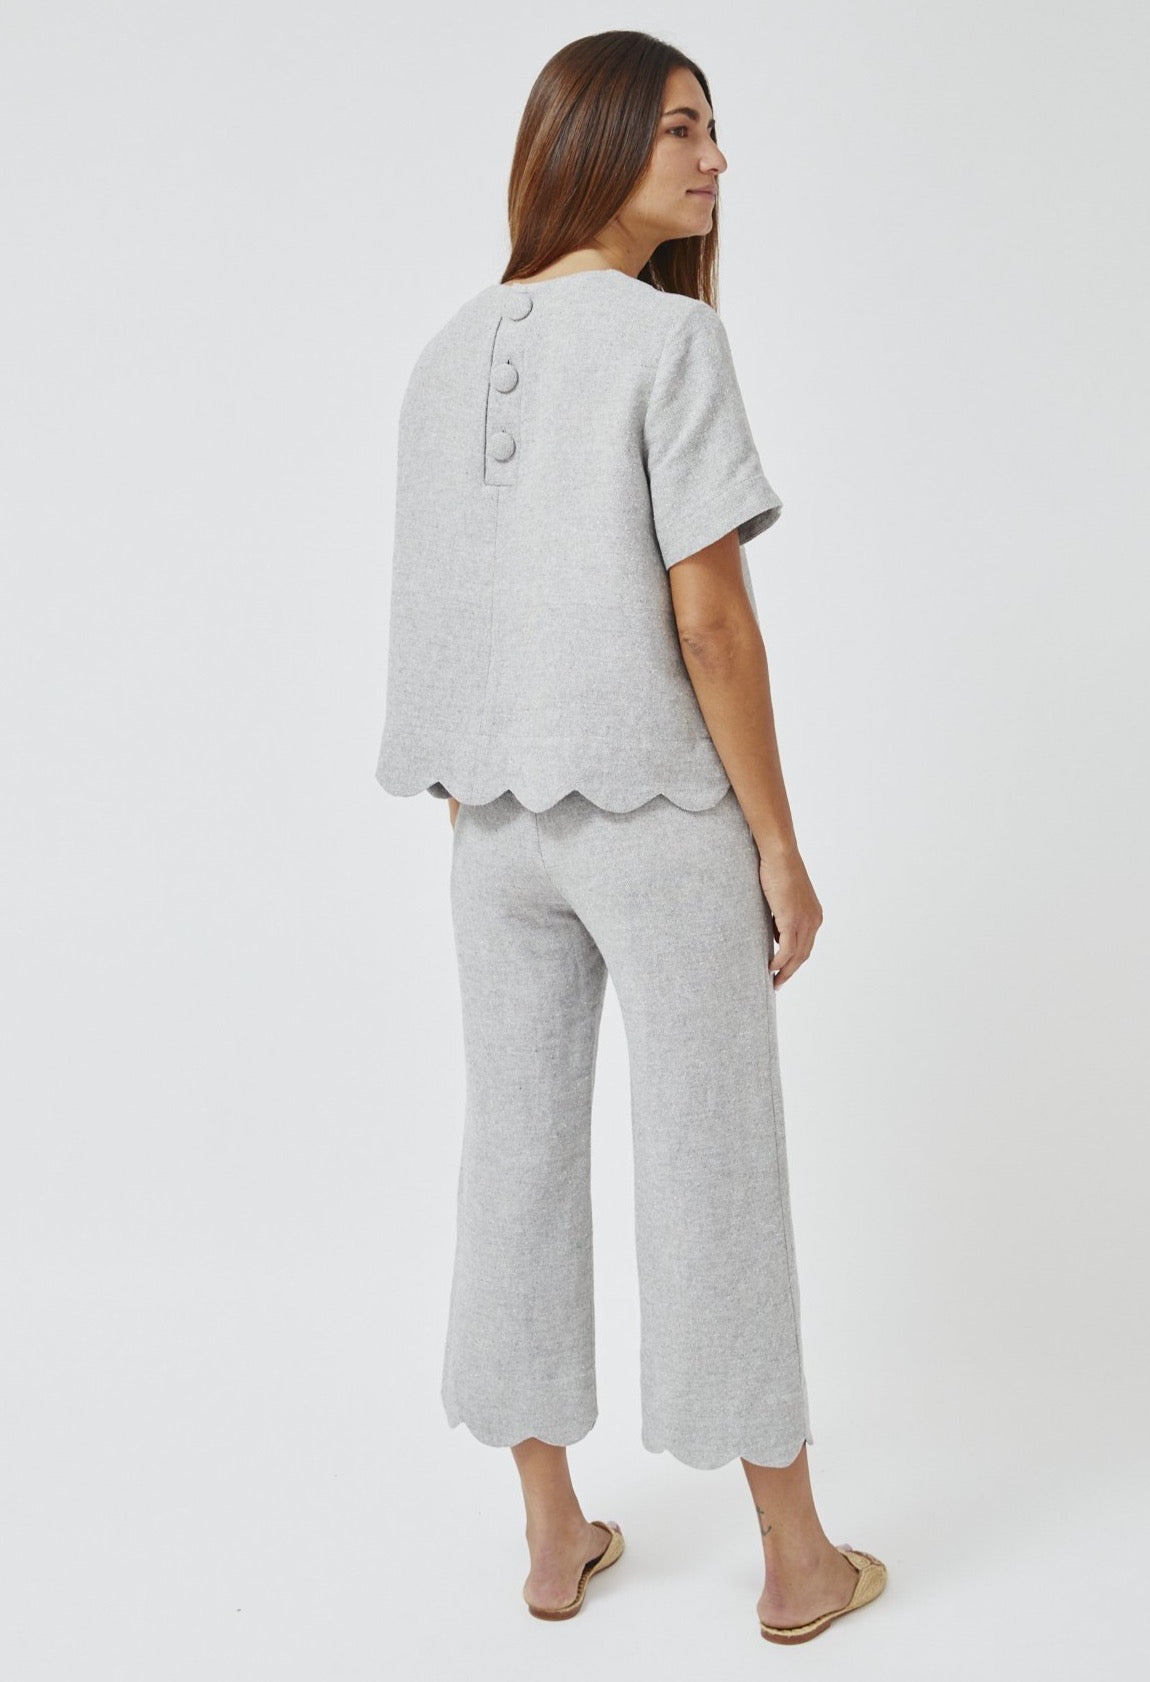 THE SCALLOP TRAPEZE T-SHIRT in VINTAGE BLUE SUMMER TWEED LINEN